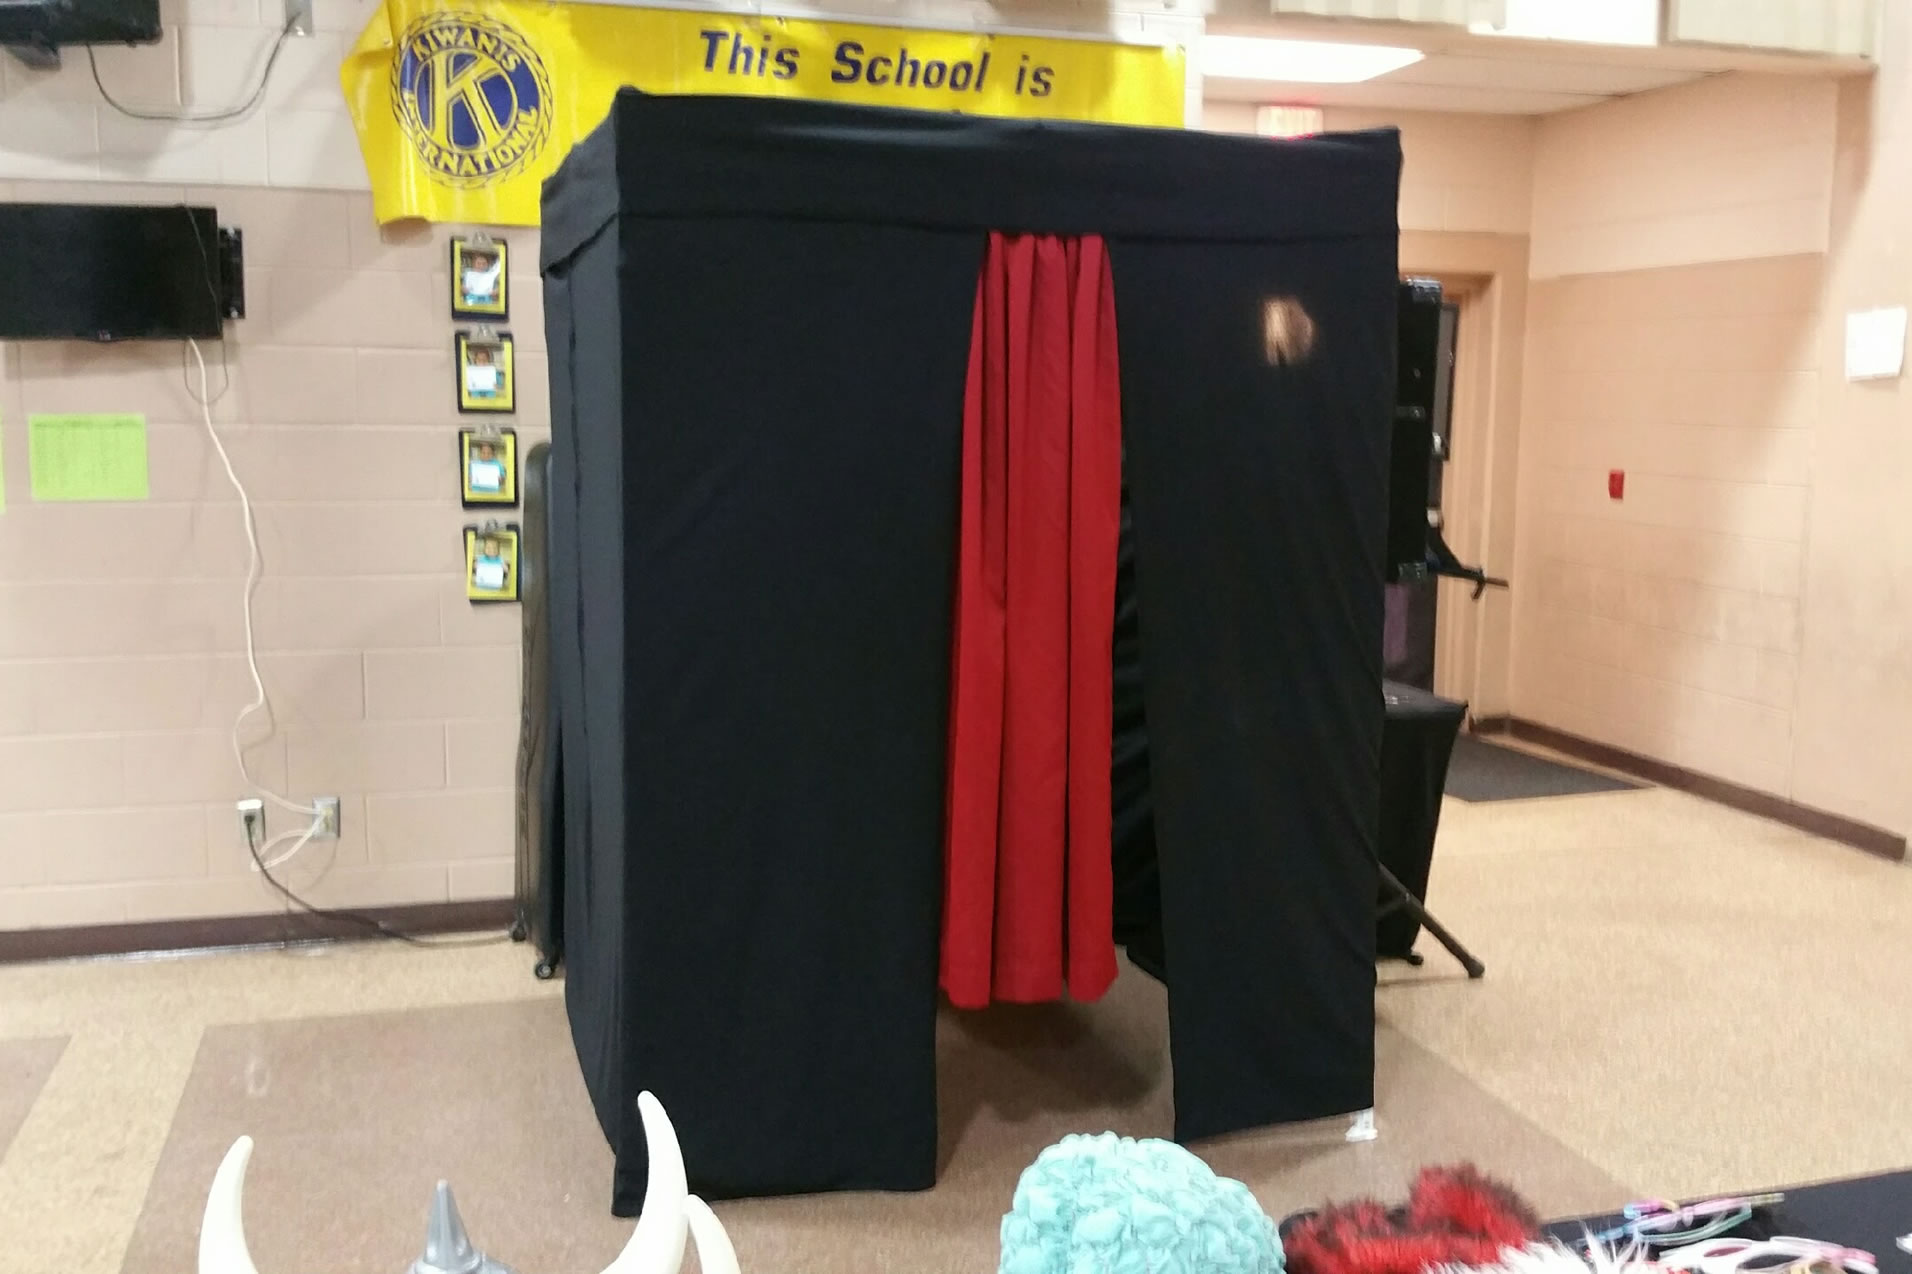 The Enclosed Photobooth